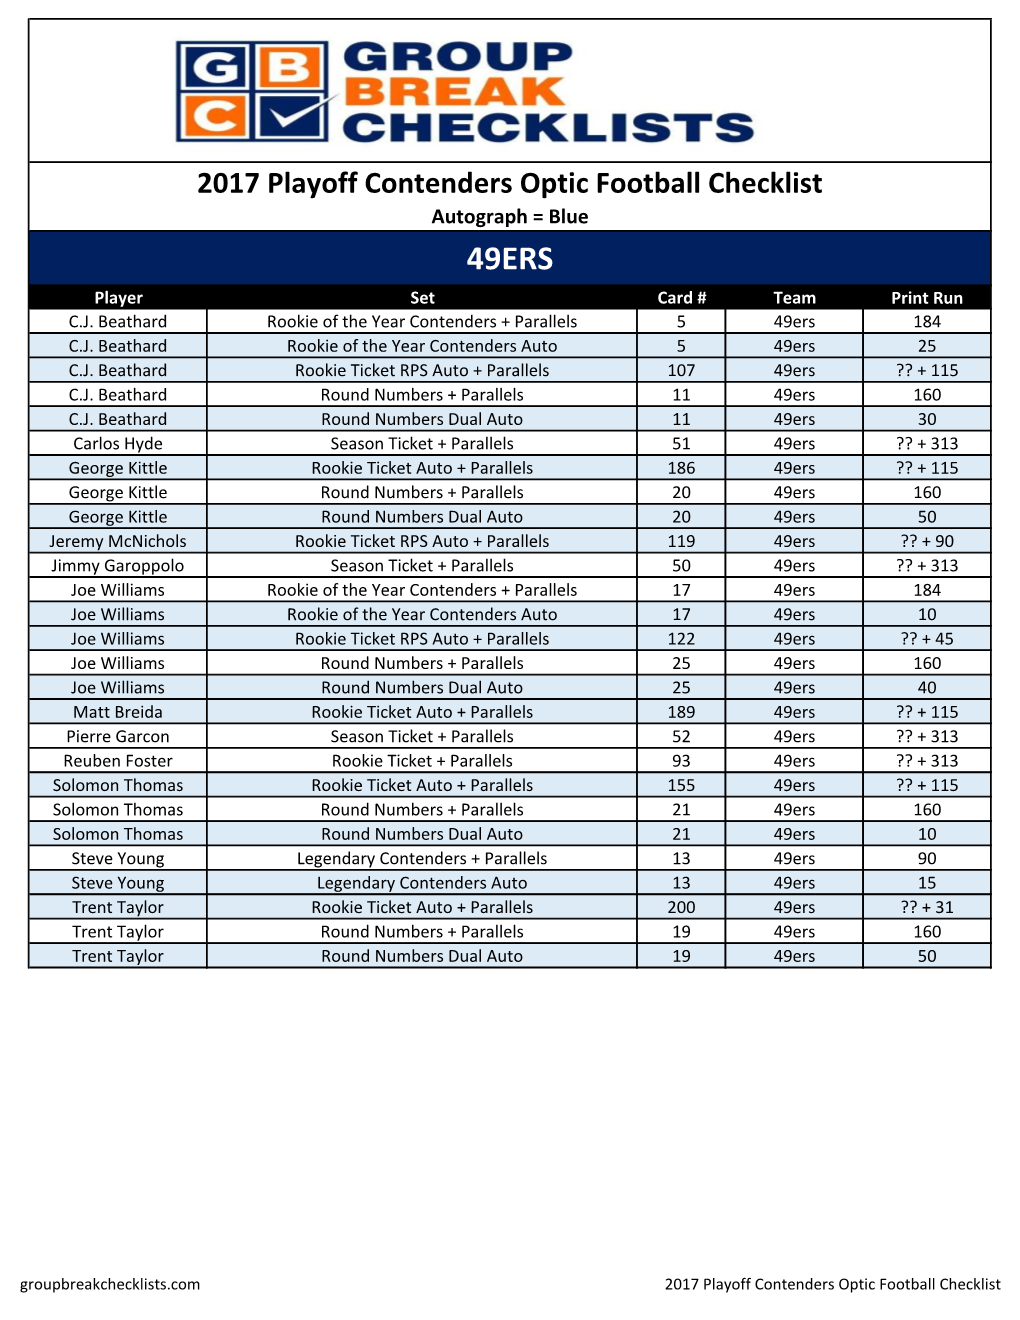 2017 Playoff Contenders Optic Checklist